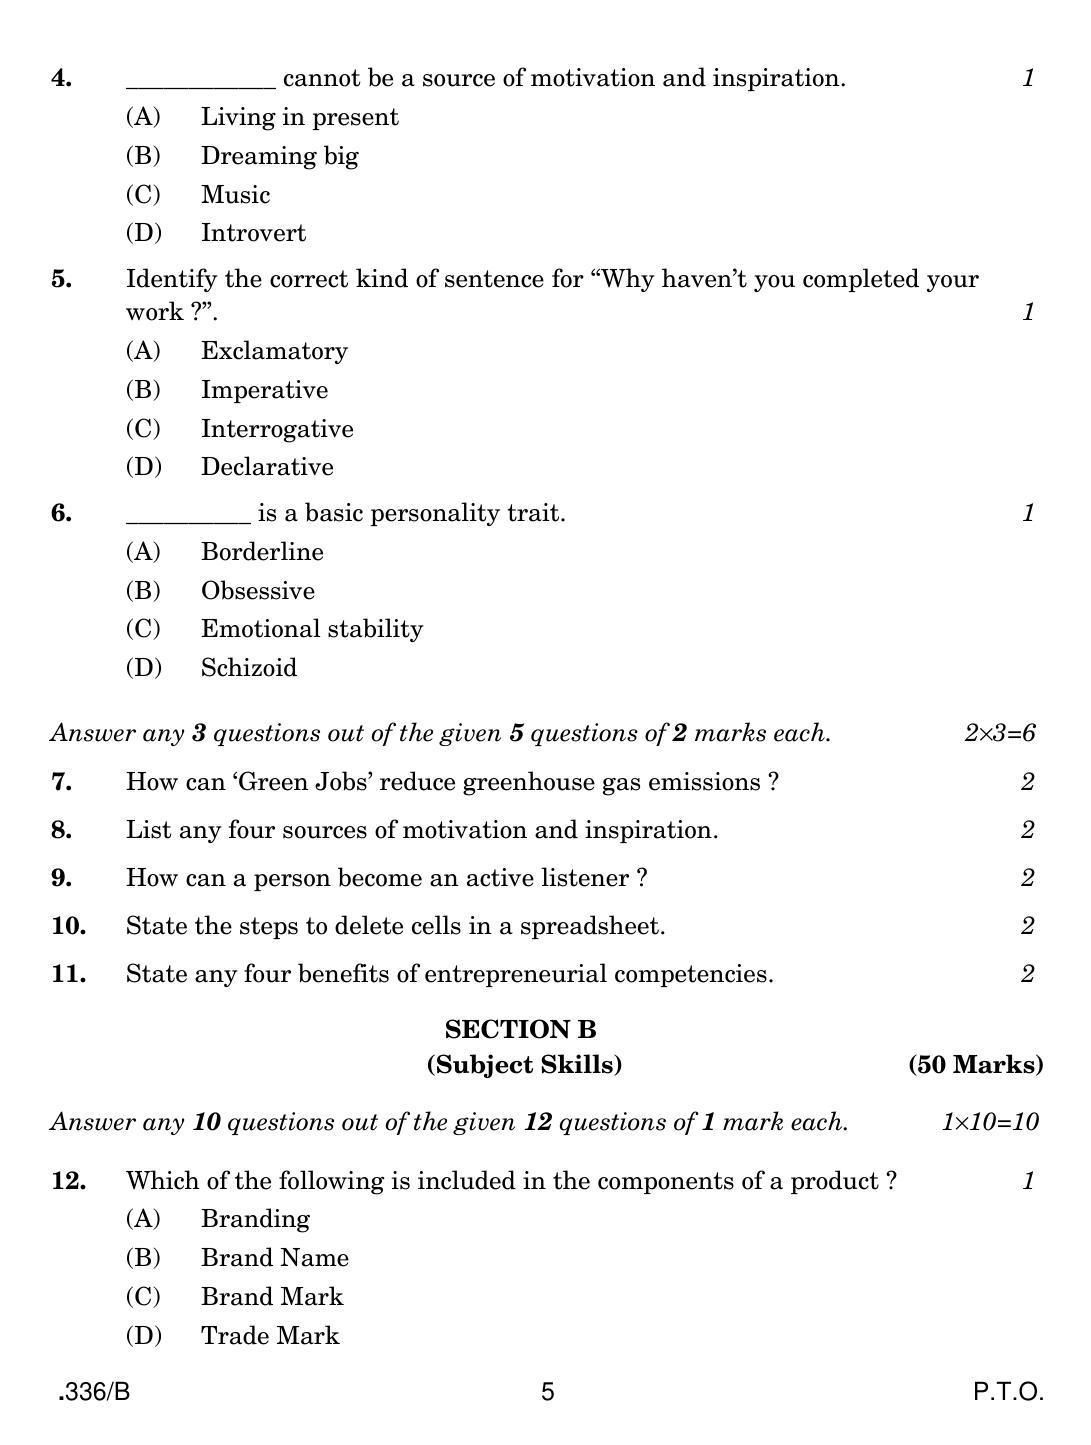 CBSE Class 12 Marketing 2020 Compartment Question Paper - Page 5